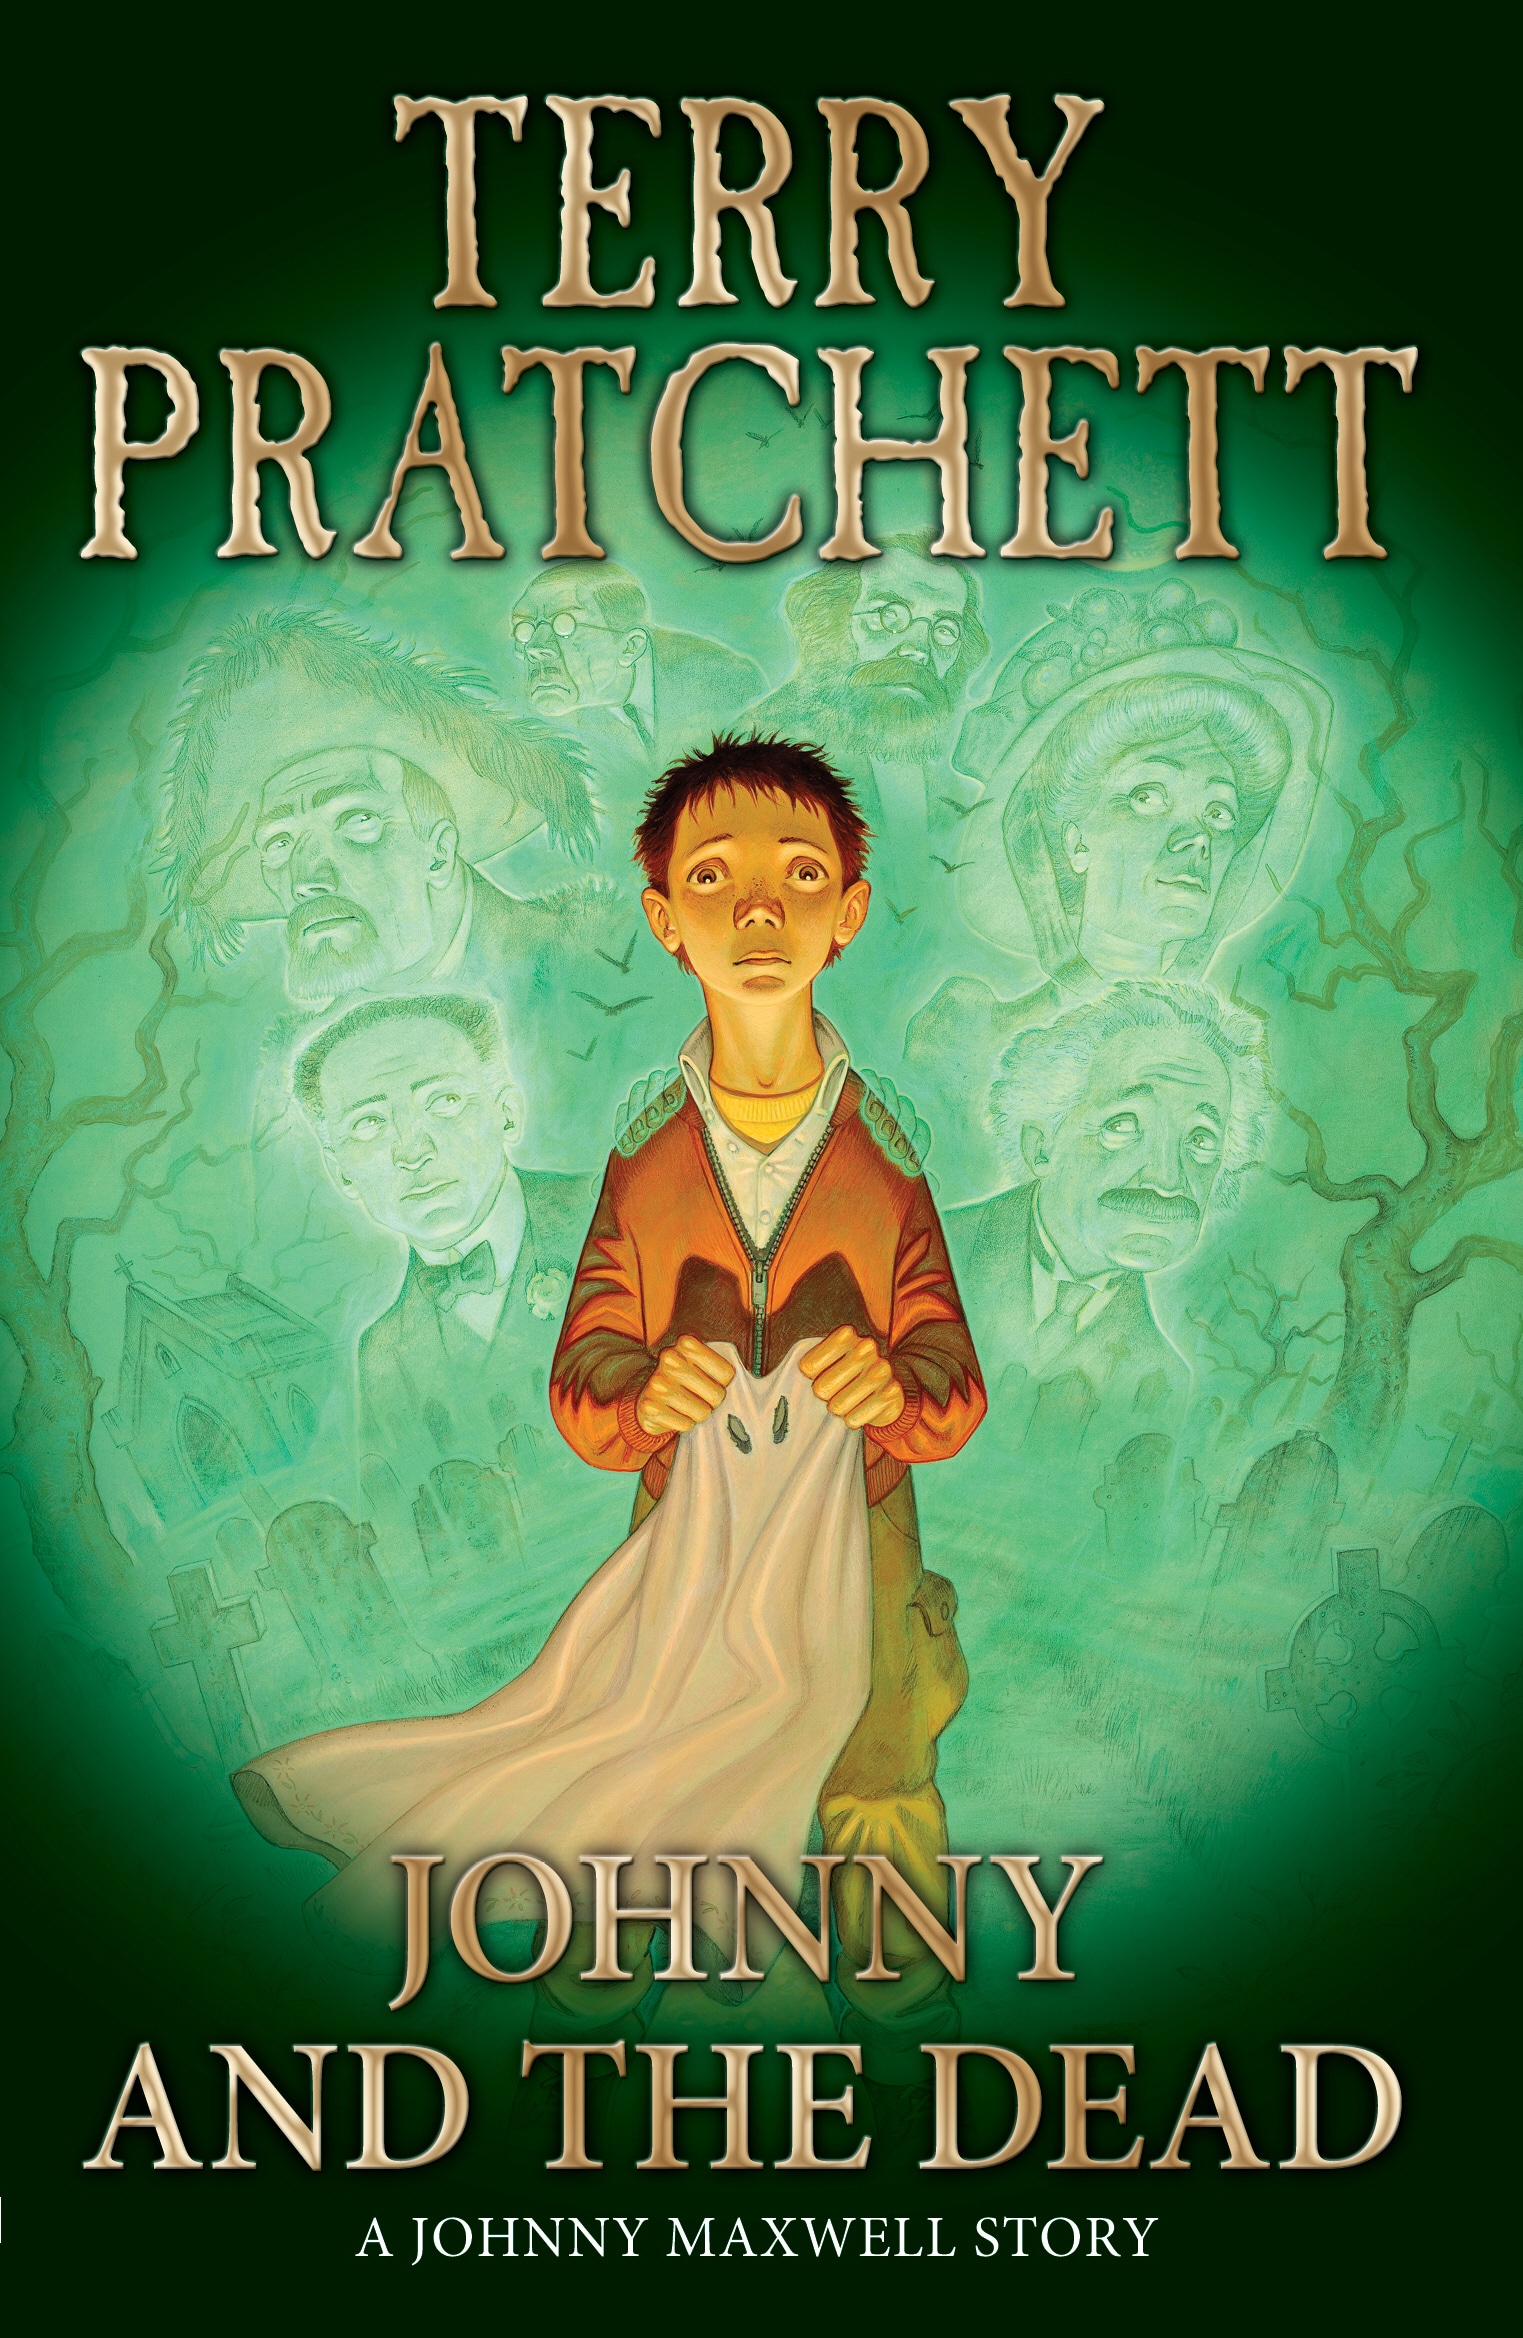 Book “Johnny and the Dead” by Terry Pratchett — April 29, 2004